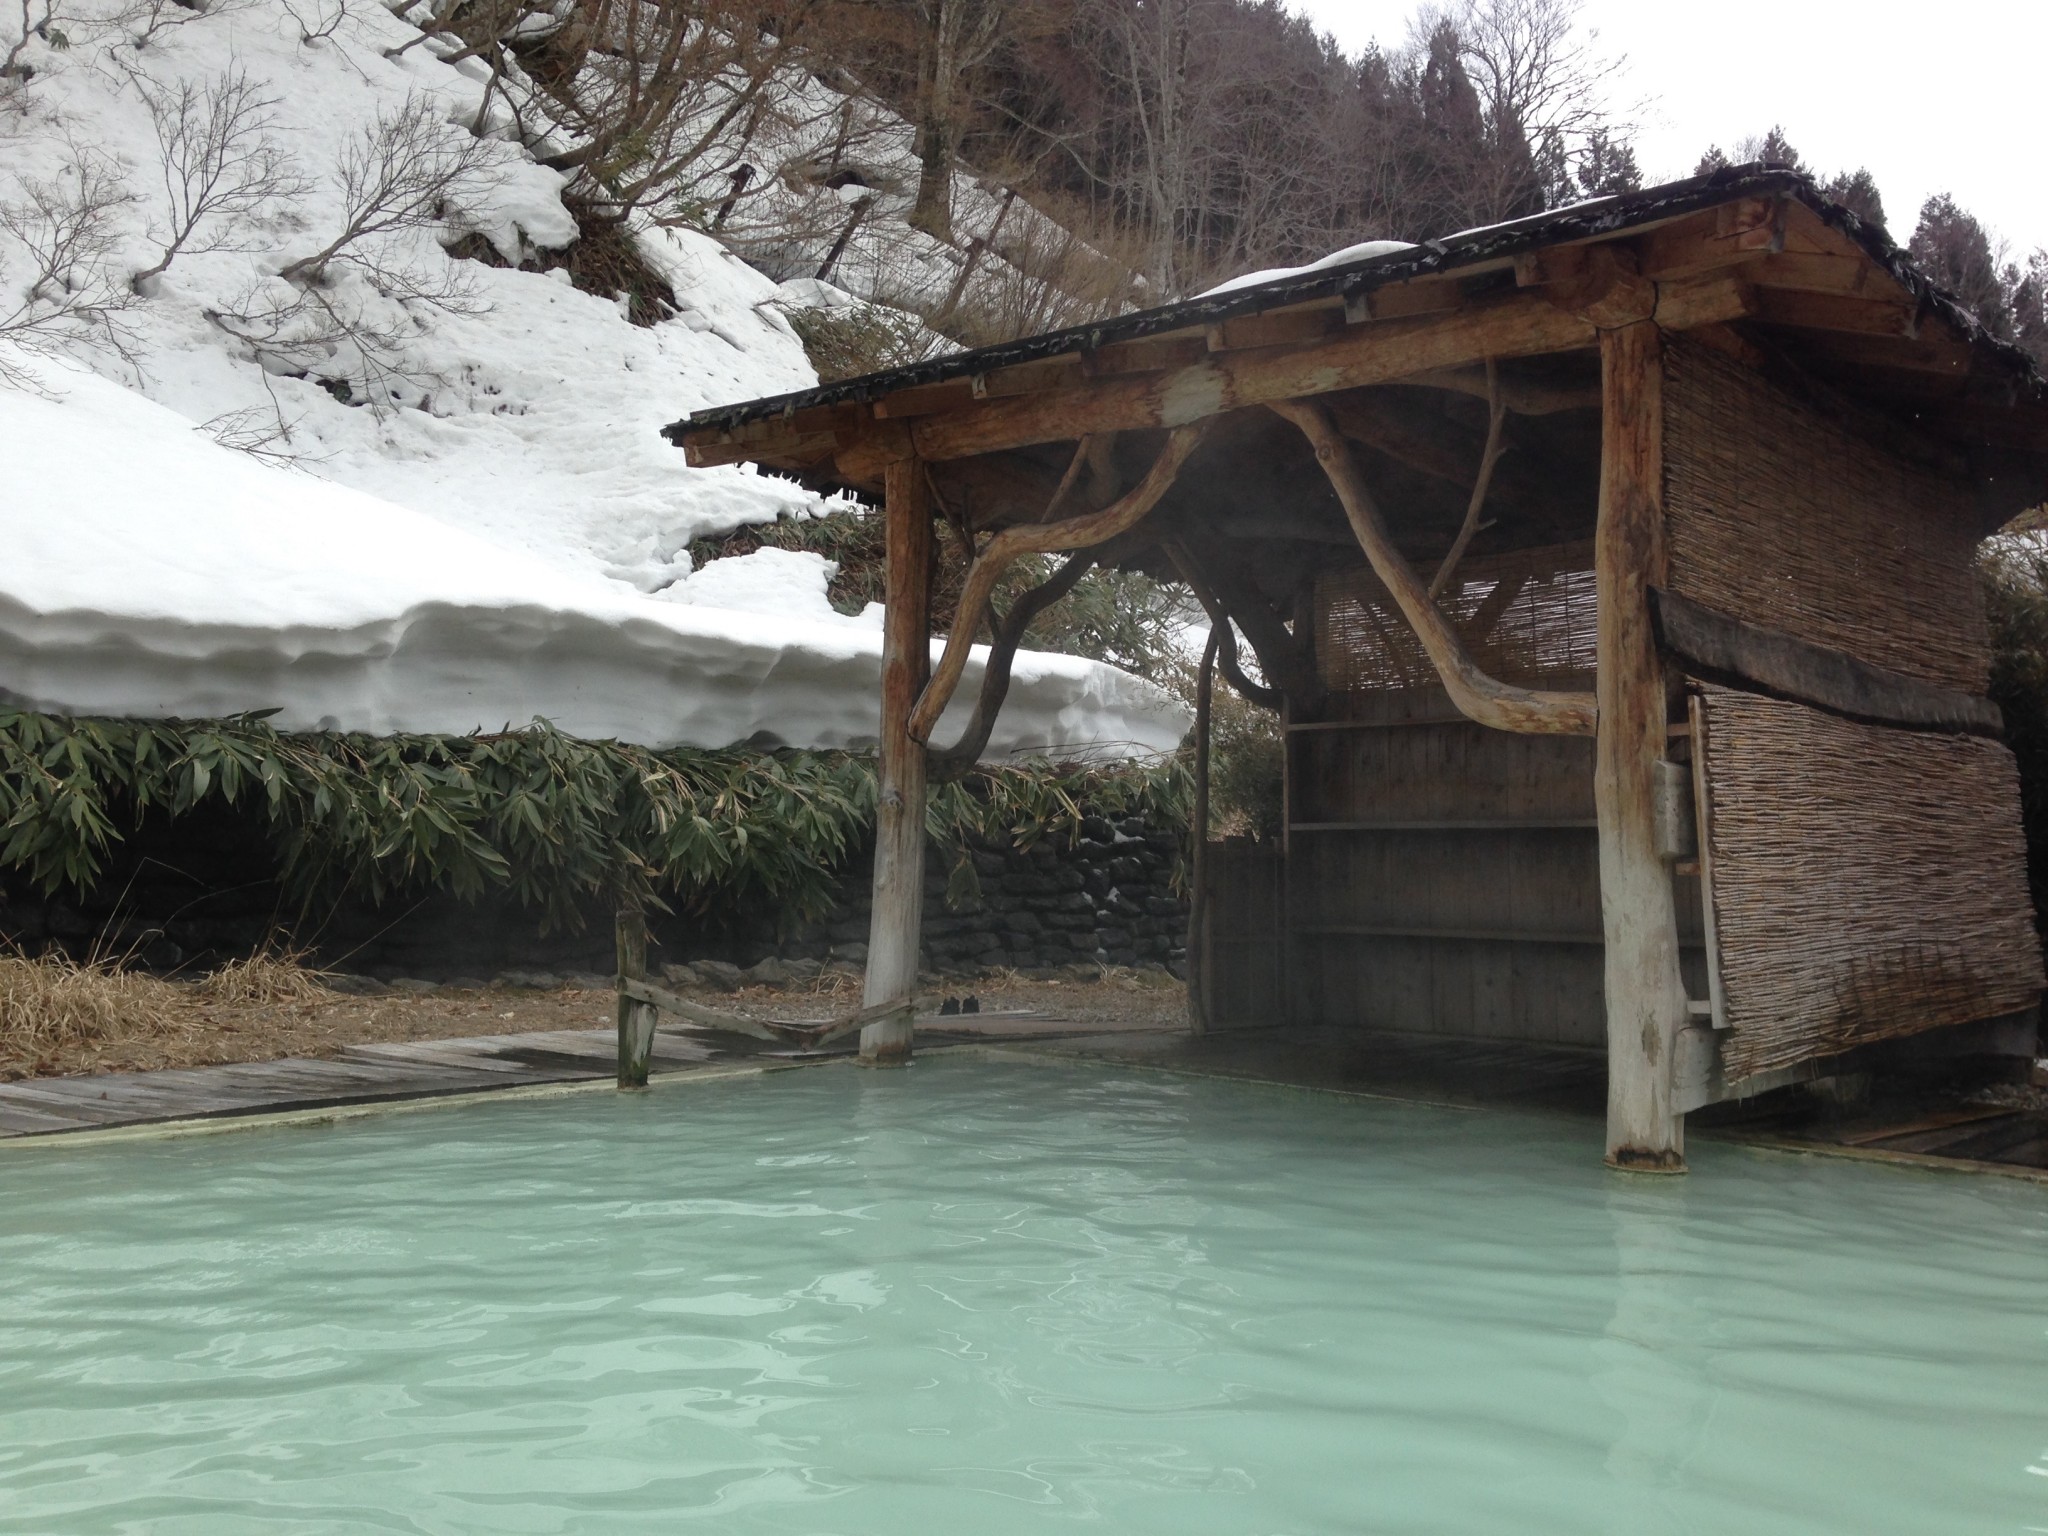 Healing your wounds in the hot springs of Akita!?